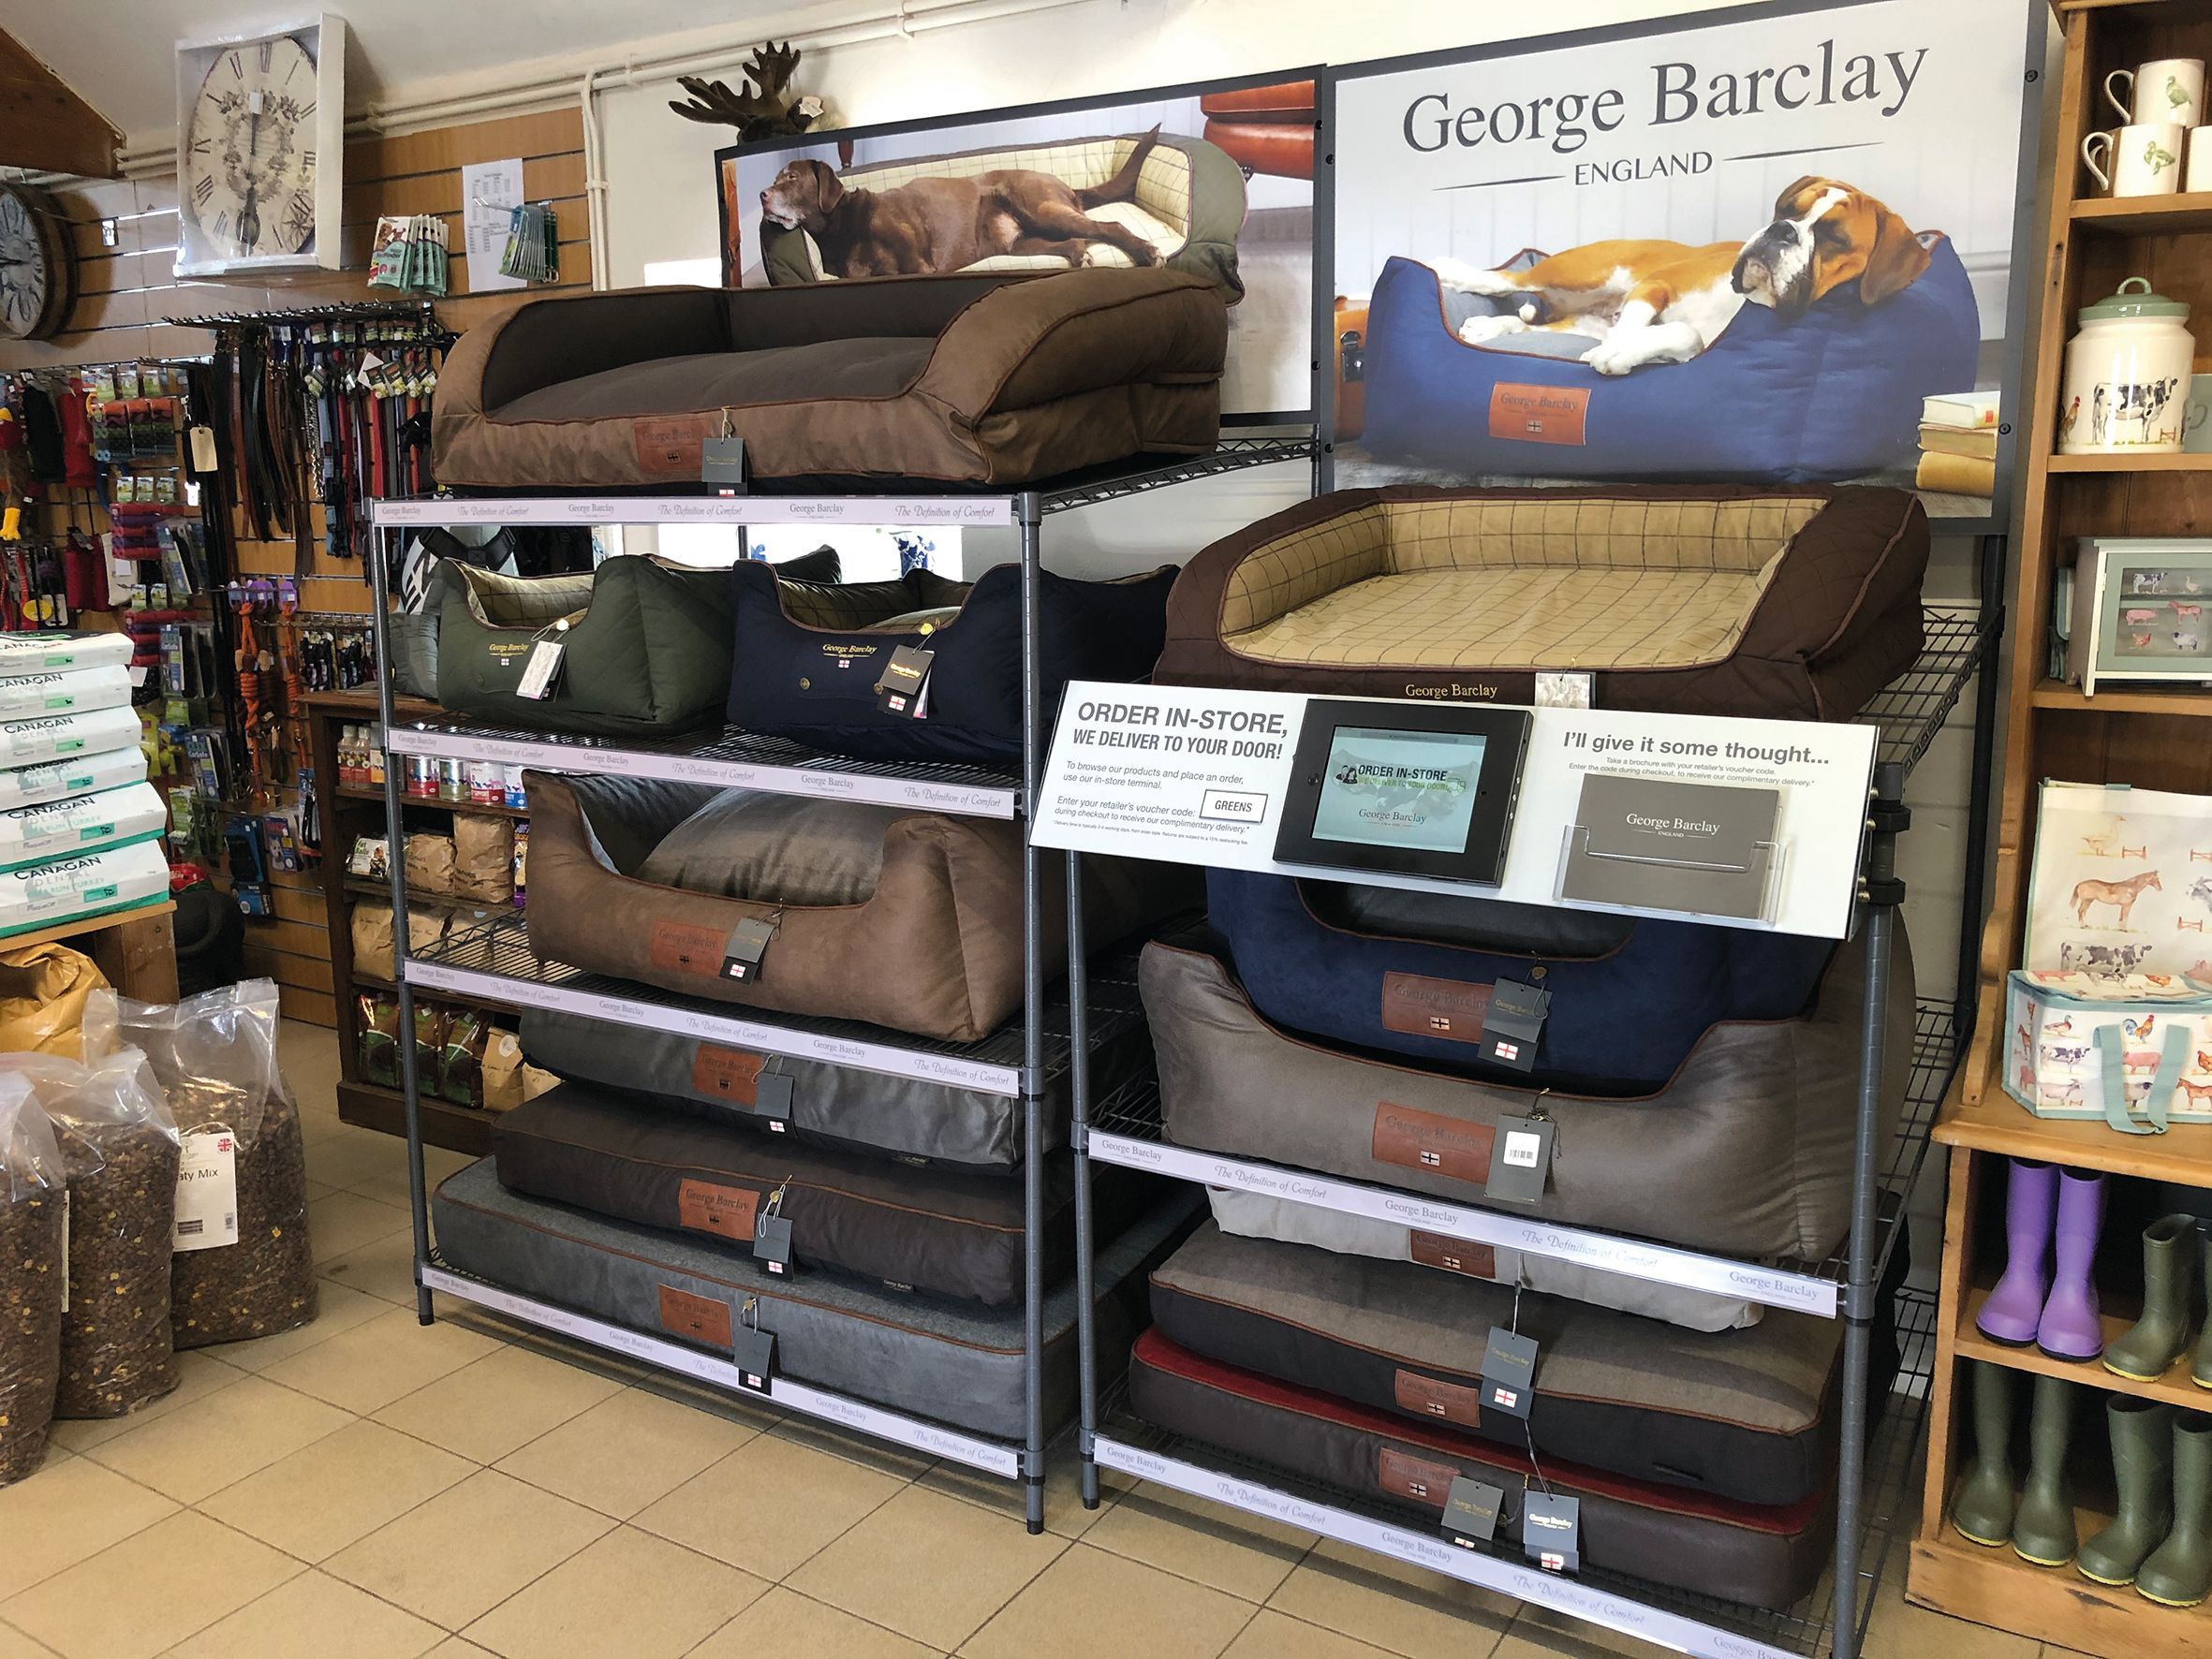 George Barclay’s new in-store ordering system set to revolutionise how consumers buy luxury dog beds